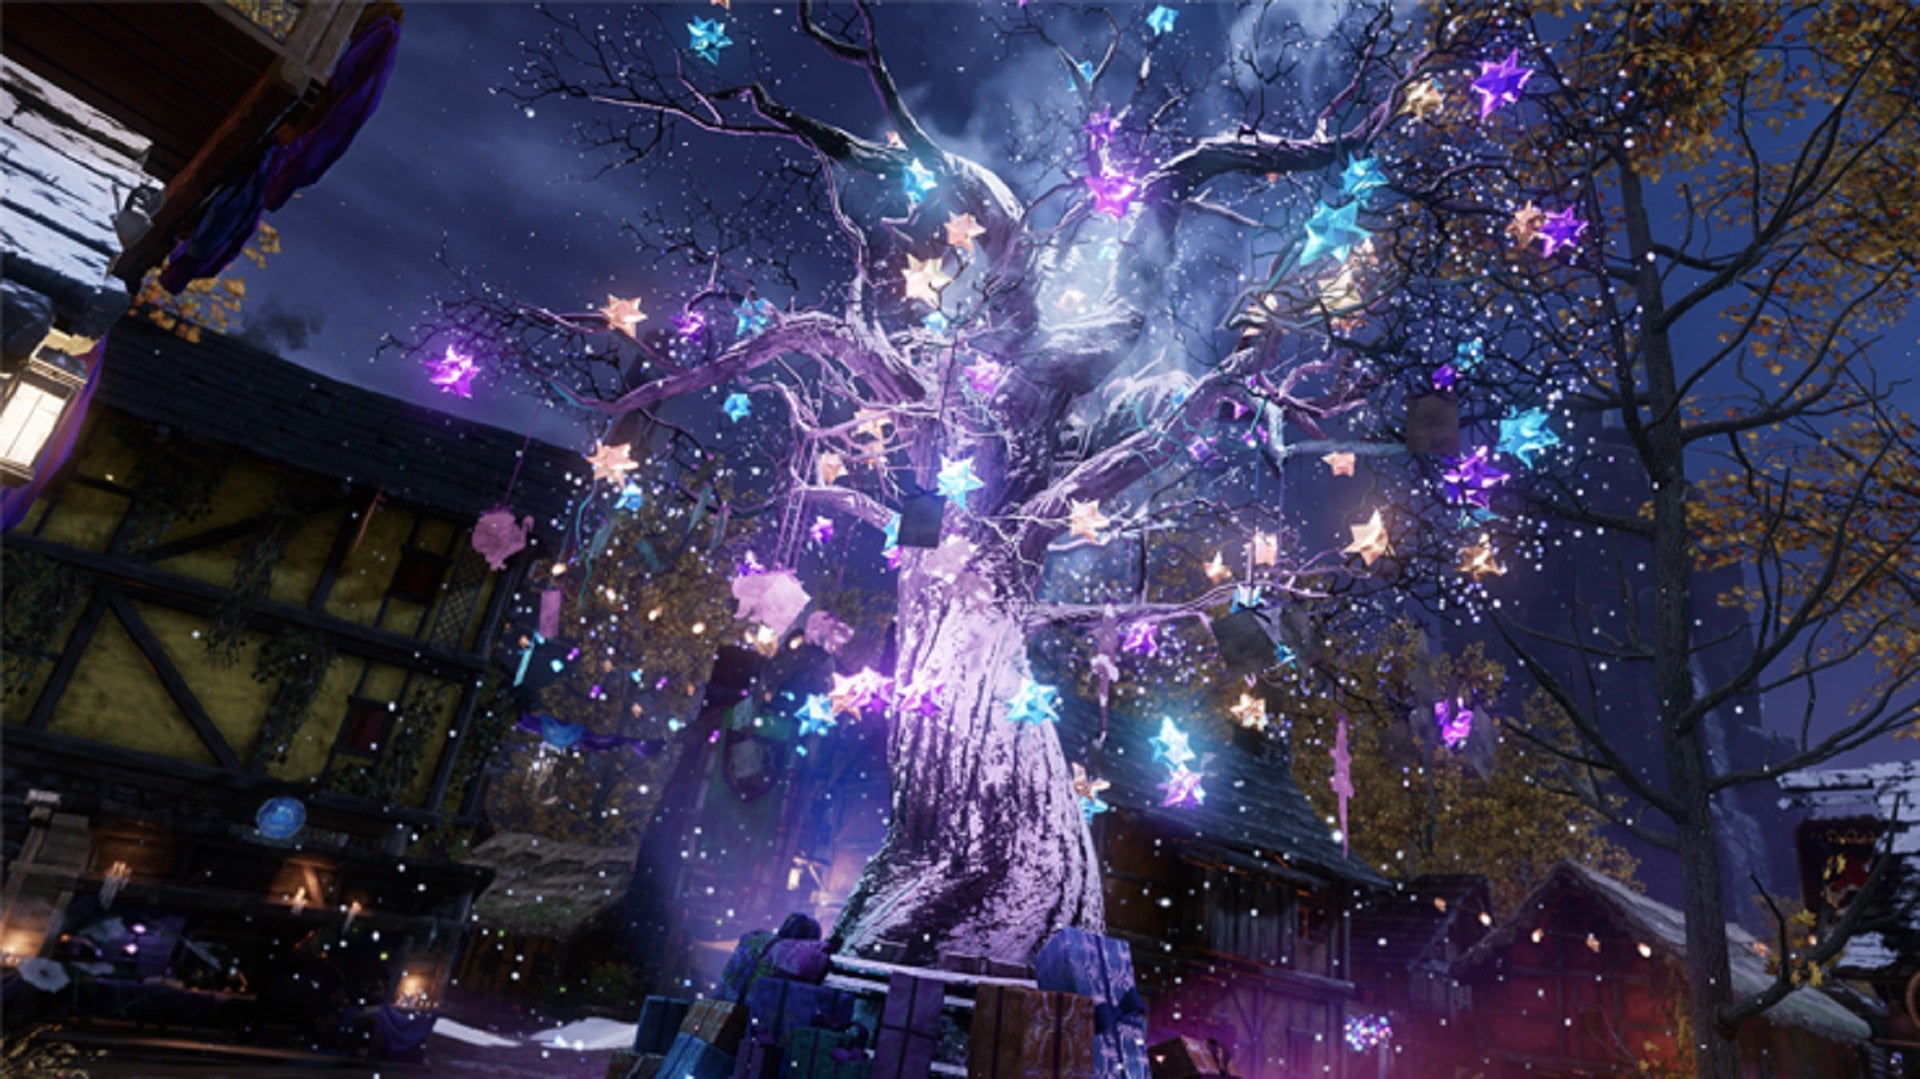 In a New World township, a bare-branched tree is decorated with festive lights and surrounded by snowfall.